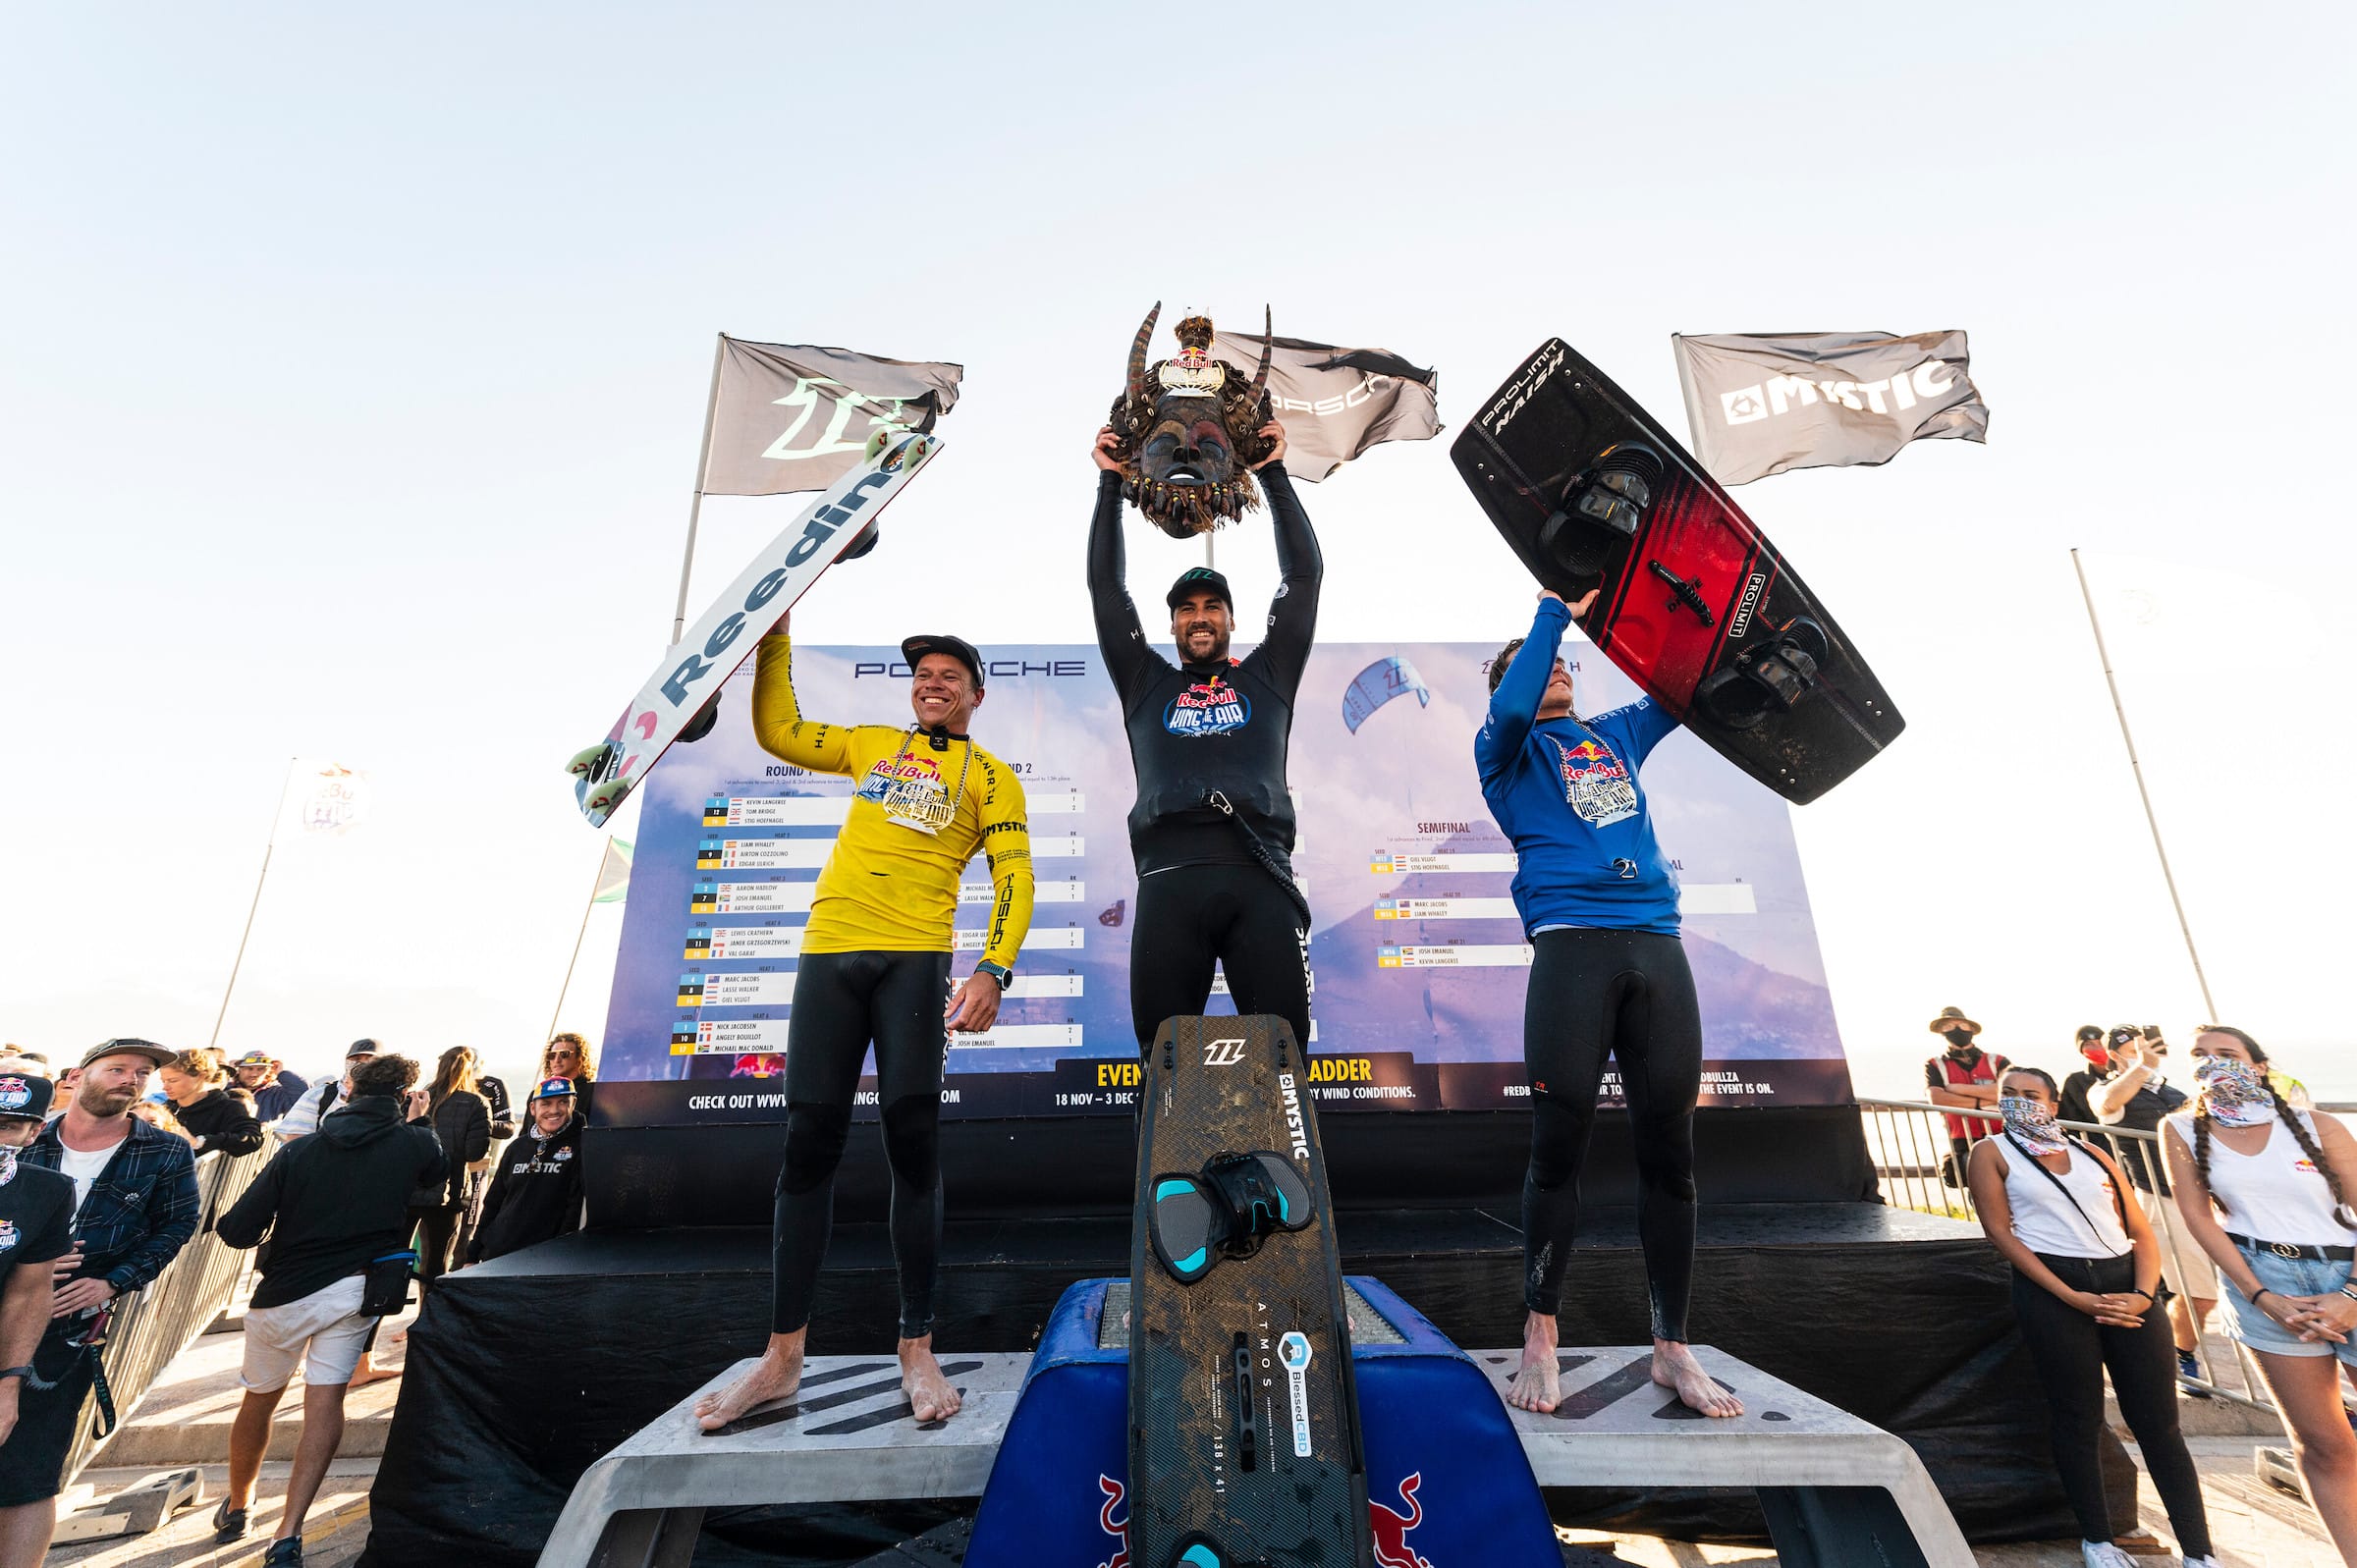 Kevin langeree, marc jacobs and stig hoegnagel celebrate the podium at red bull king of the air in cape town, south africa on november 21, 2021